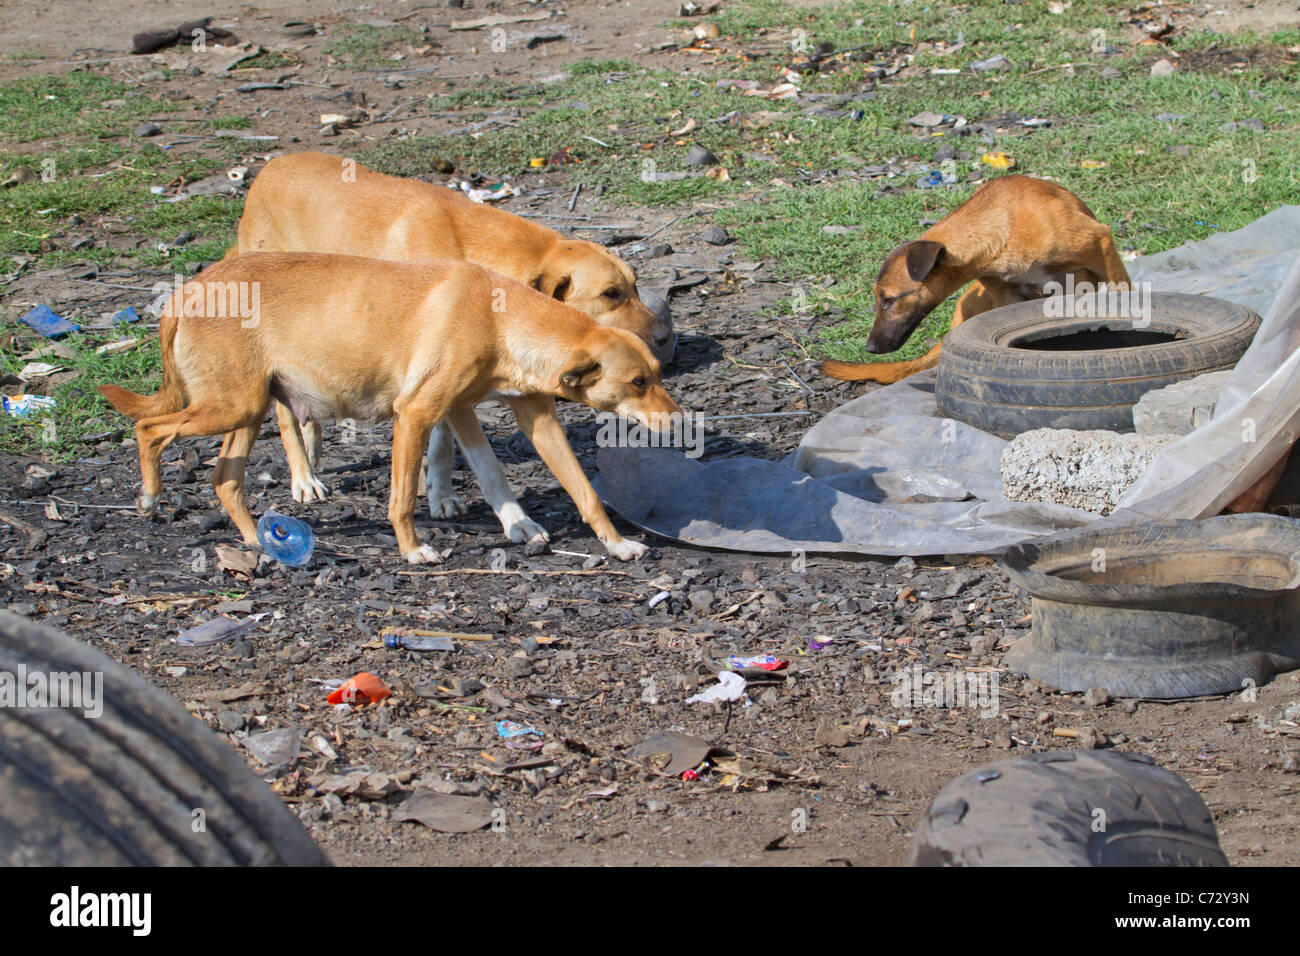 Stray dogs in a village in rural Kenya. Stock Photo